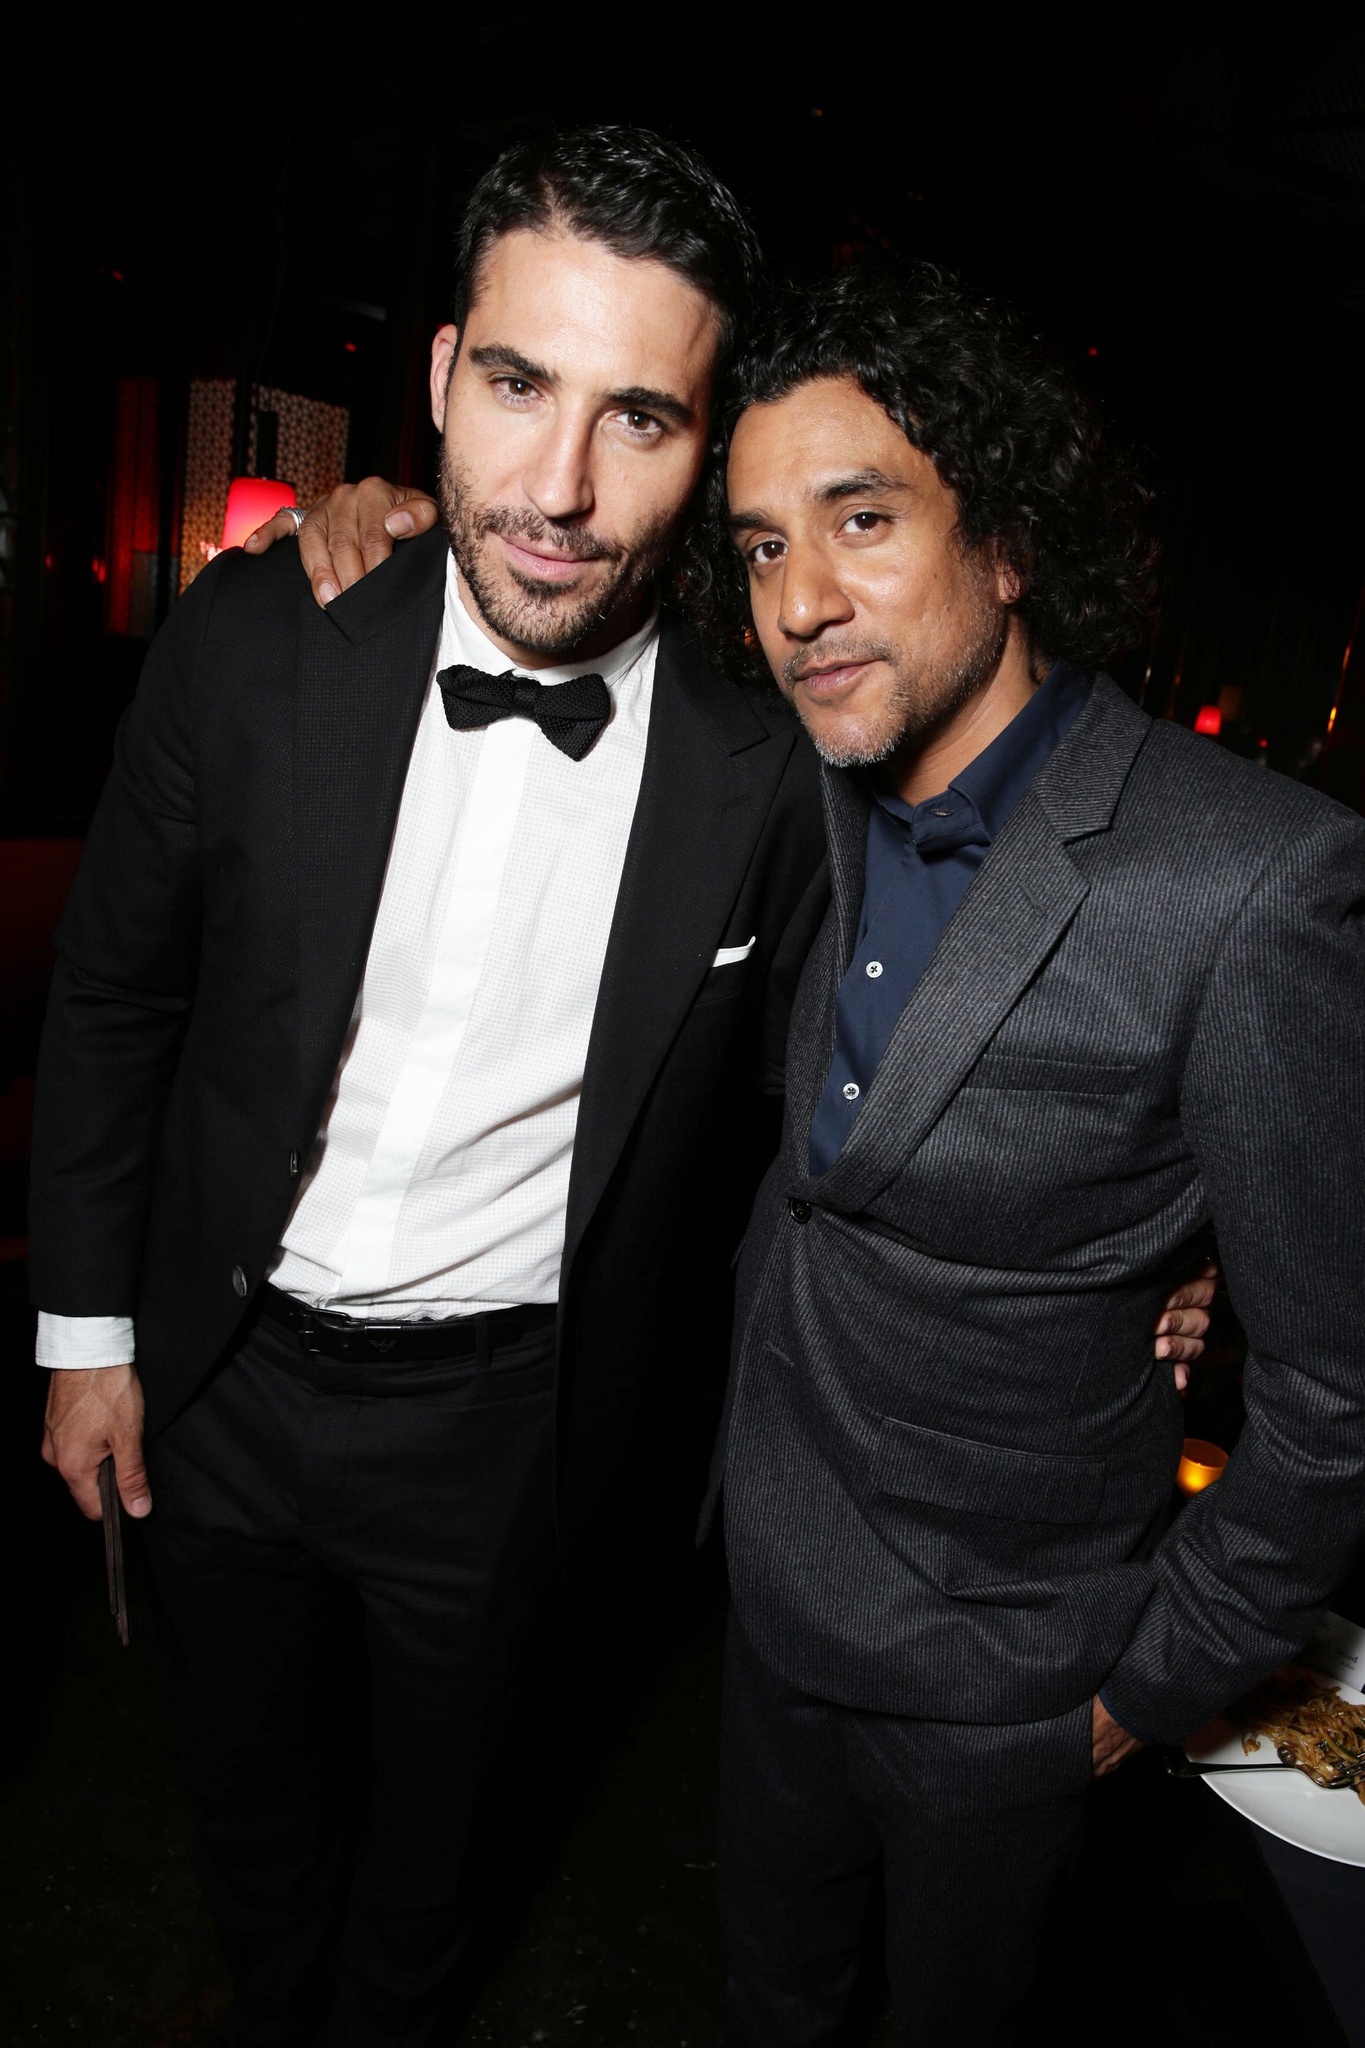 Naveen Andrews and Miguel Ángel Silvestre at event of Sense8 (2015)